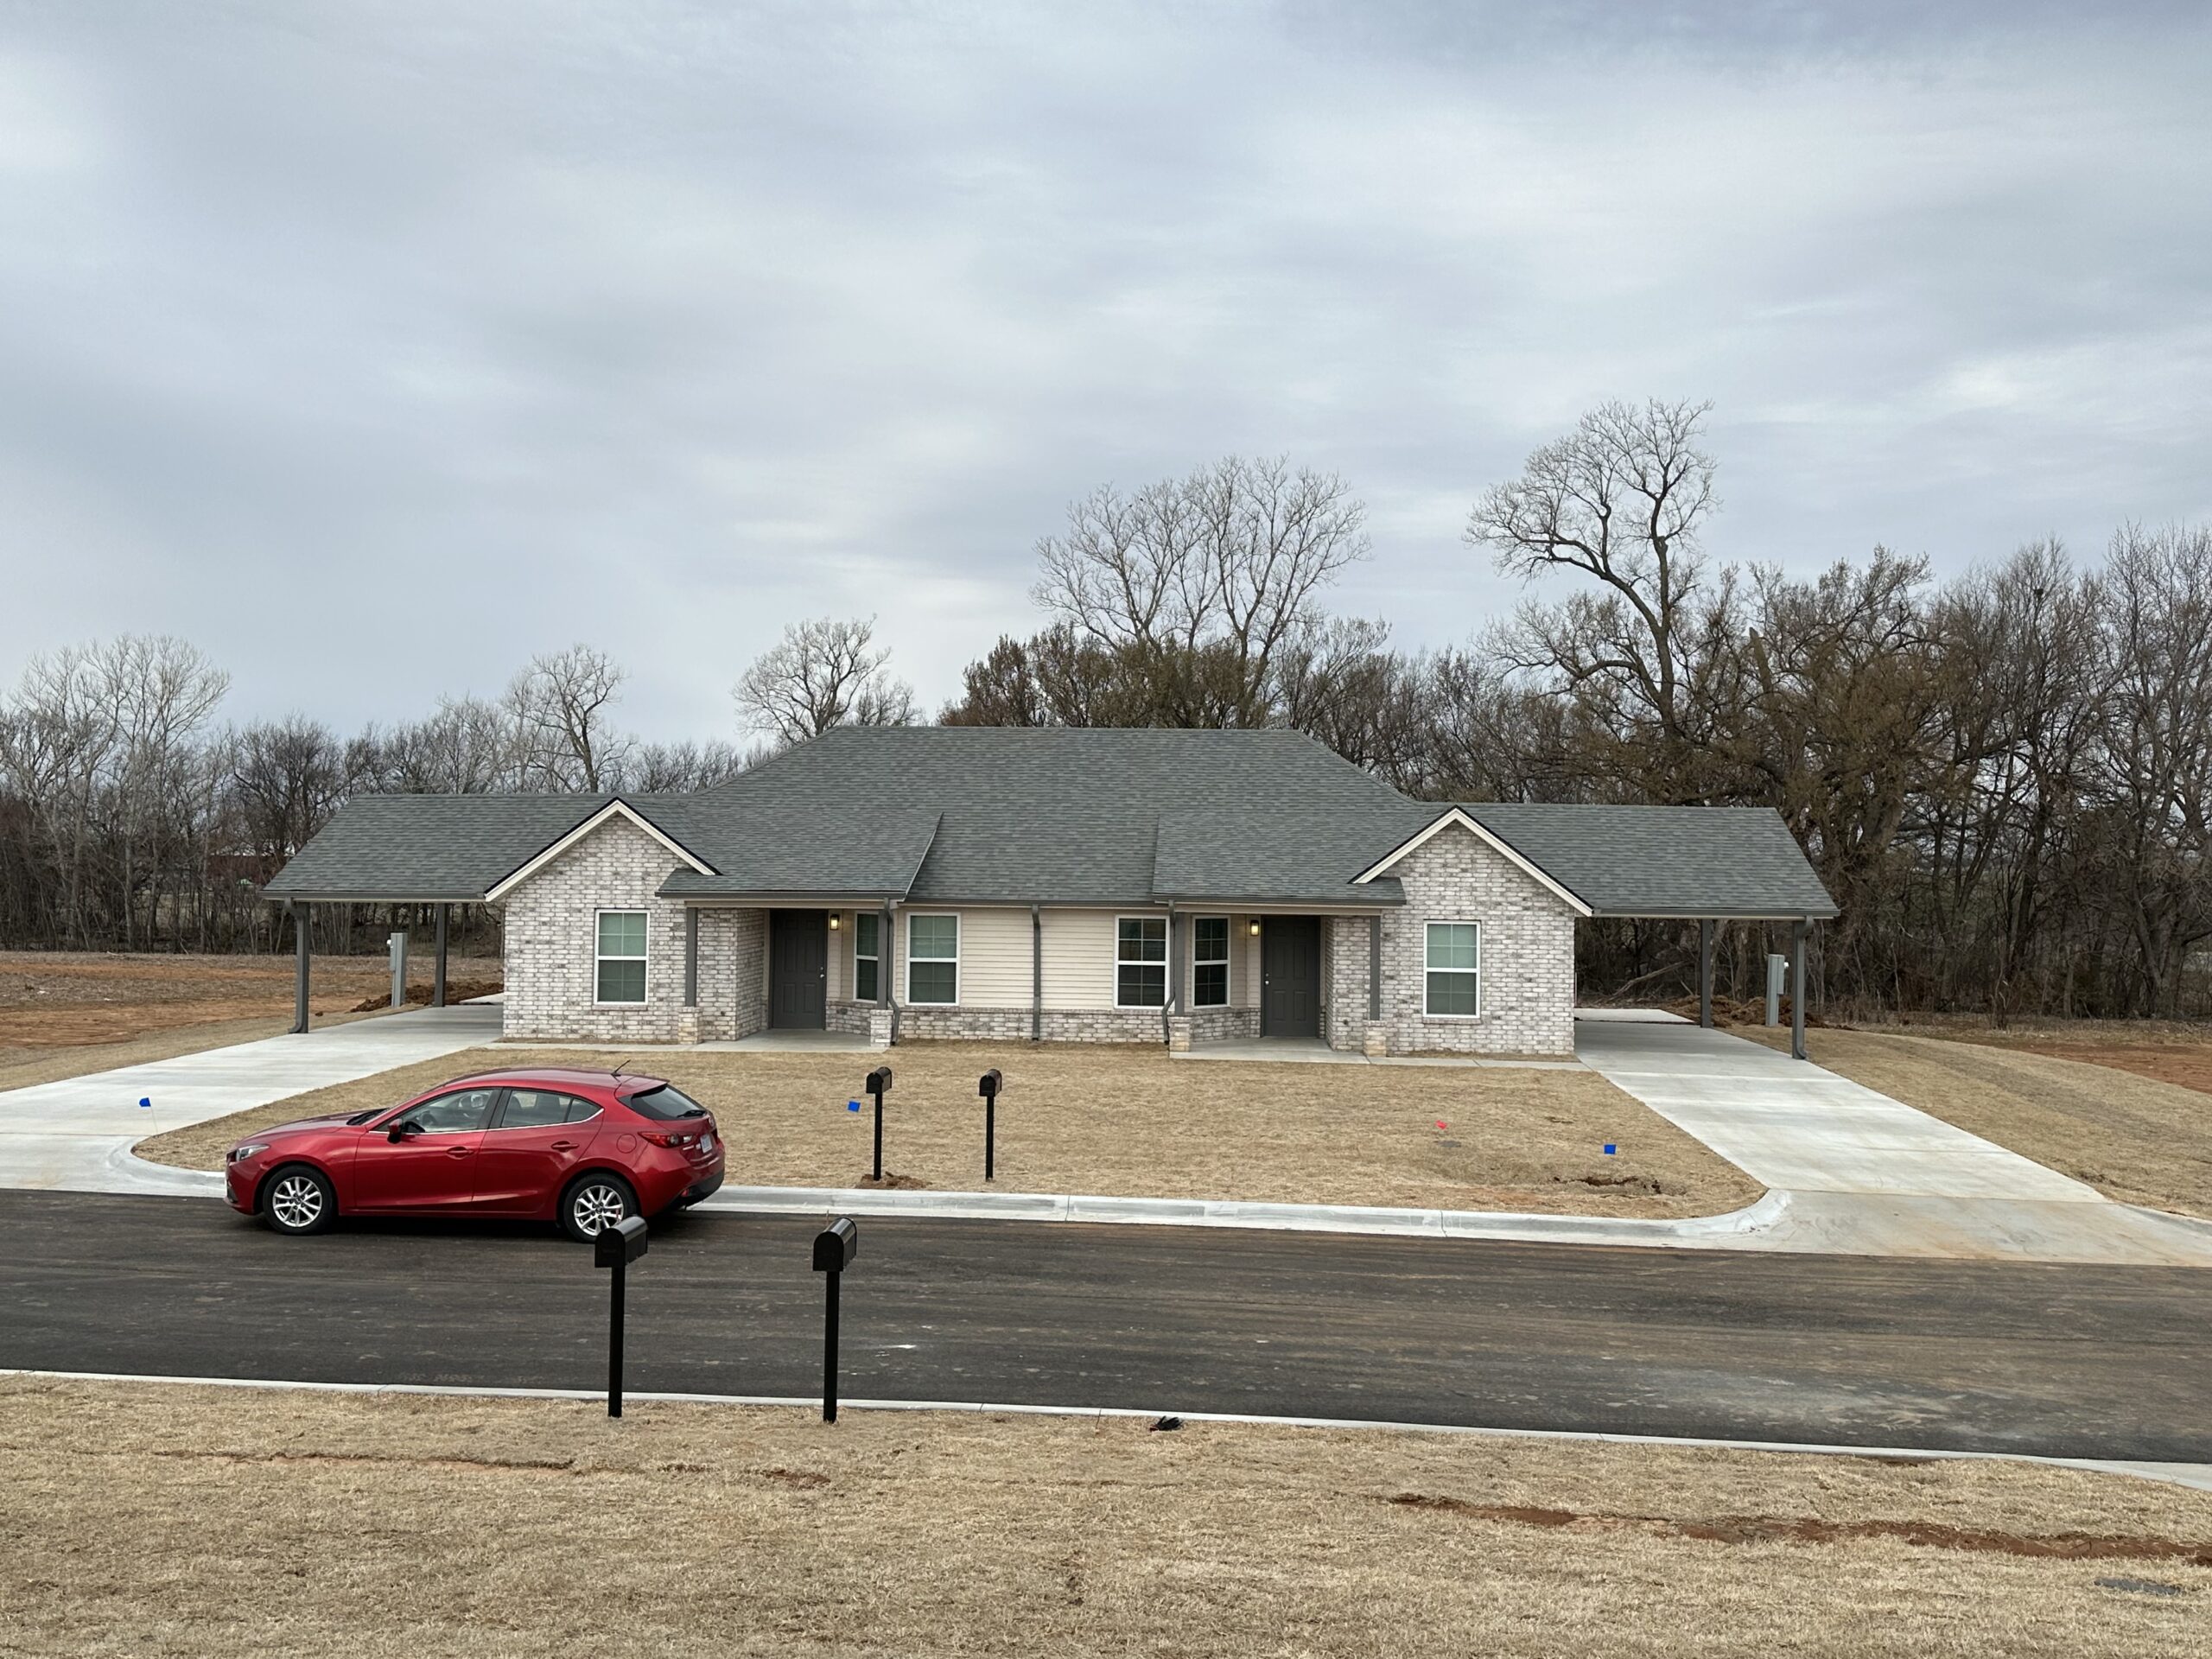 Kaw Housing Authority Emergency Duplex resulting in 4 new rental units in 12 months